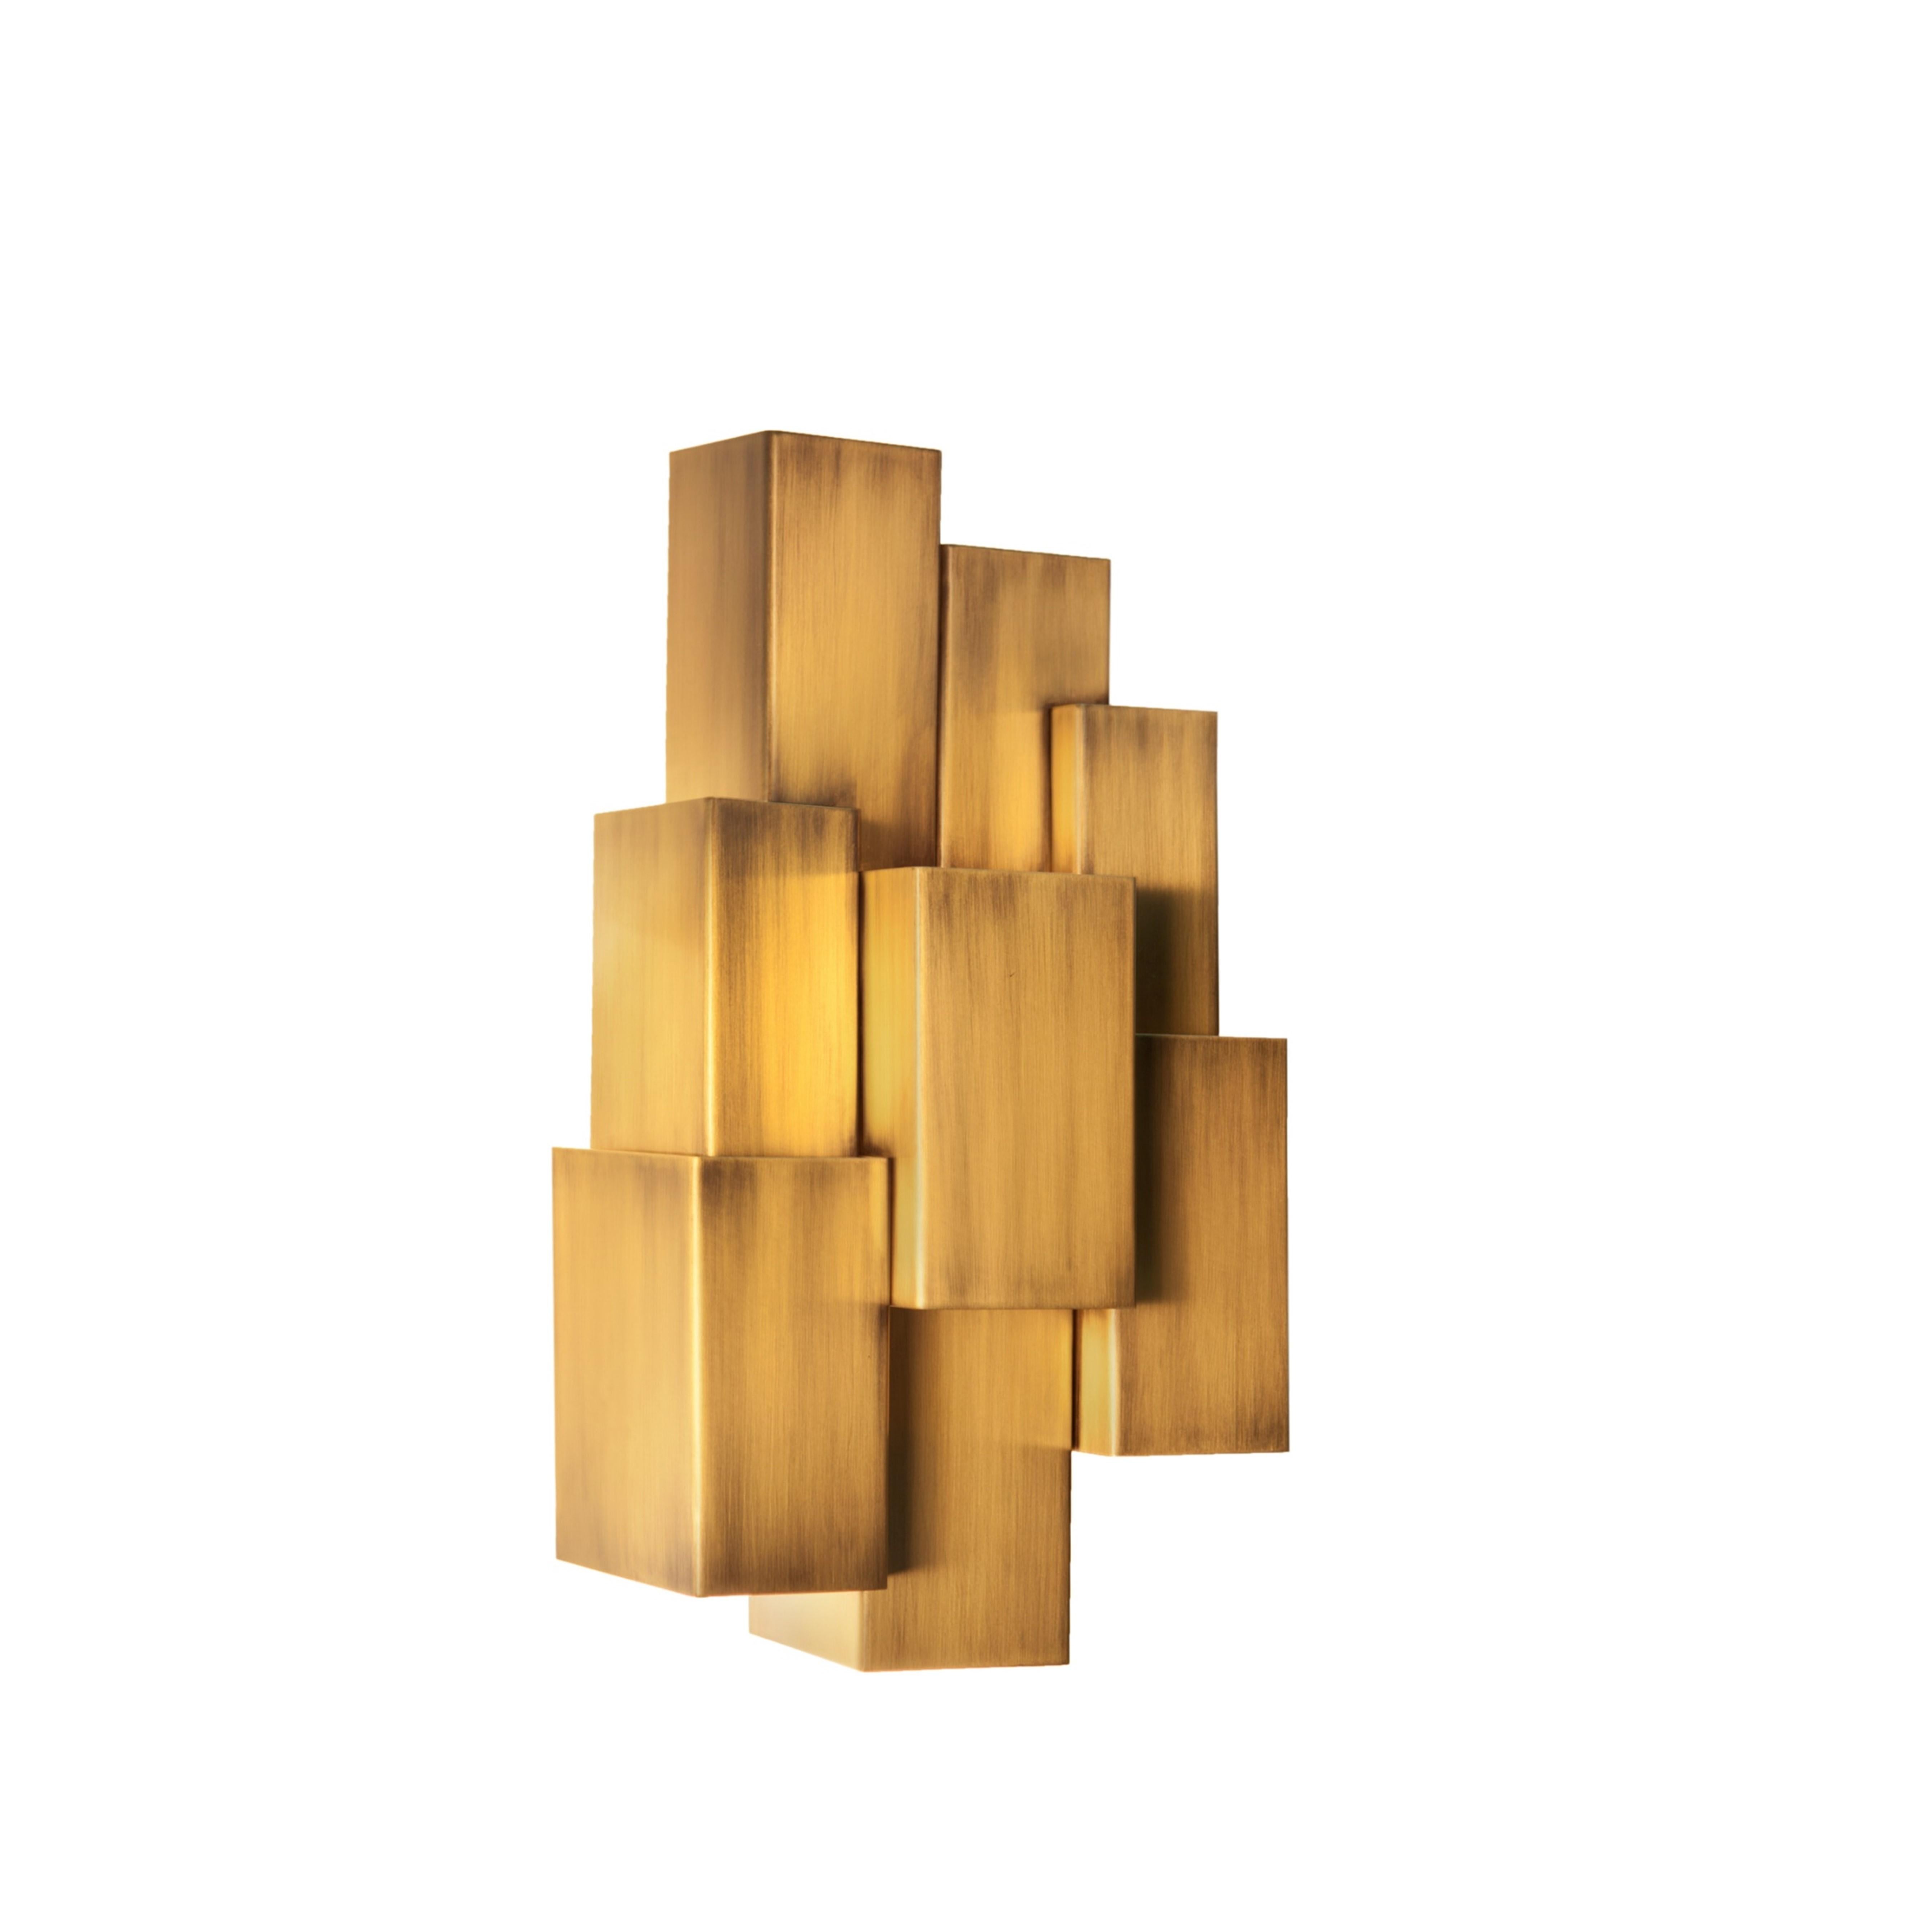 Inspiring trees recreates a treetop and is fully handcrafted. The rays of light pierce the geometric design in an unexpected way; almost ethereal.
Slender and seemingly minimal, Inspiring Trees is a lighting piece that carries form and meaning. It